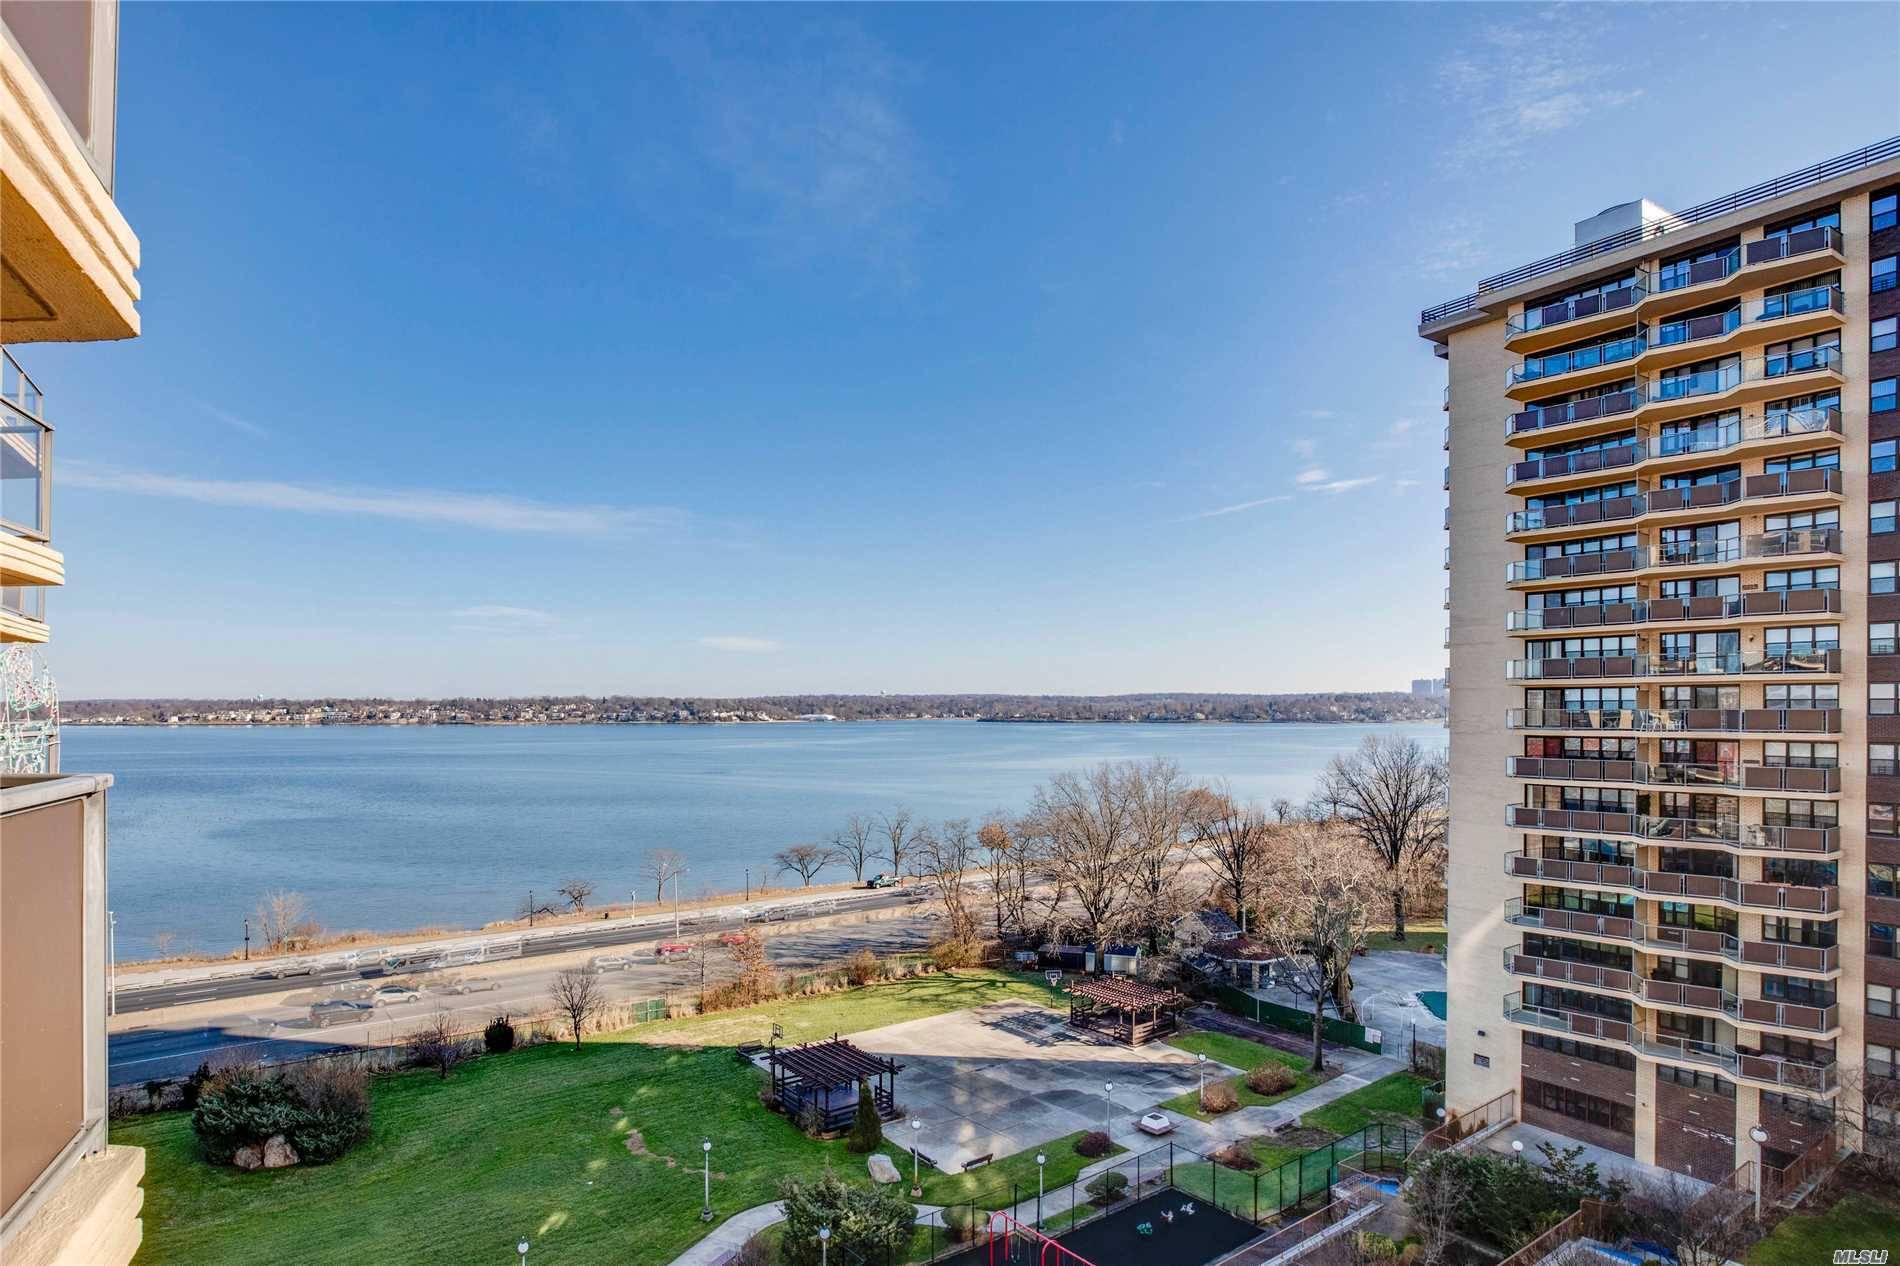 Bayside One Bedroom Co Op In The Desirable Dog Friendly Americana At The Towers Of Waters Edge.